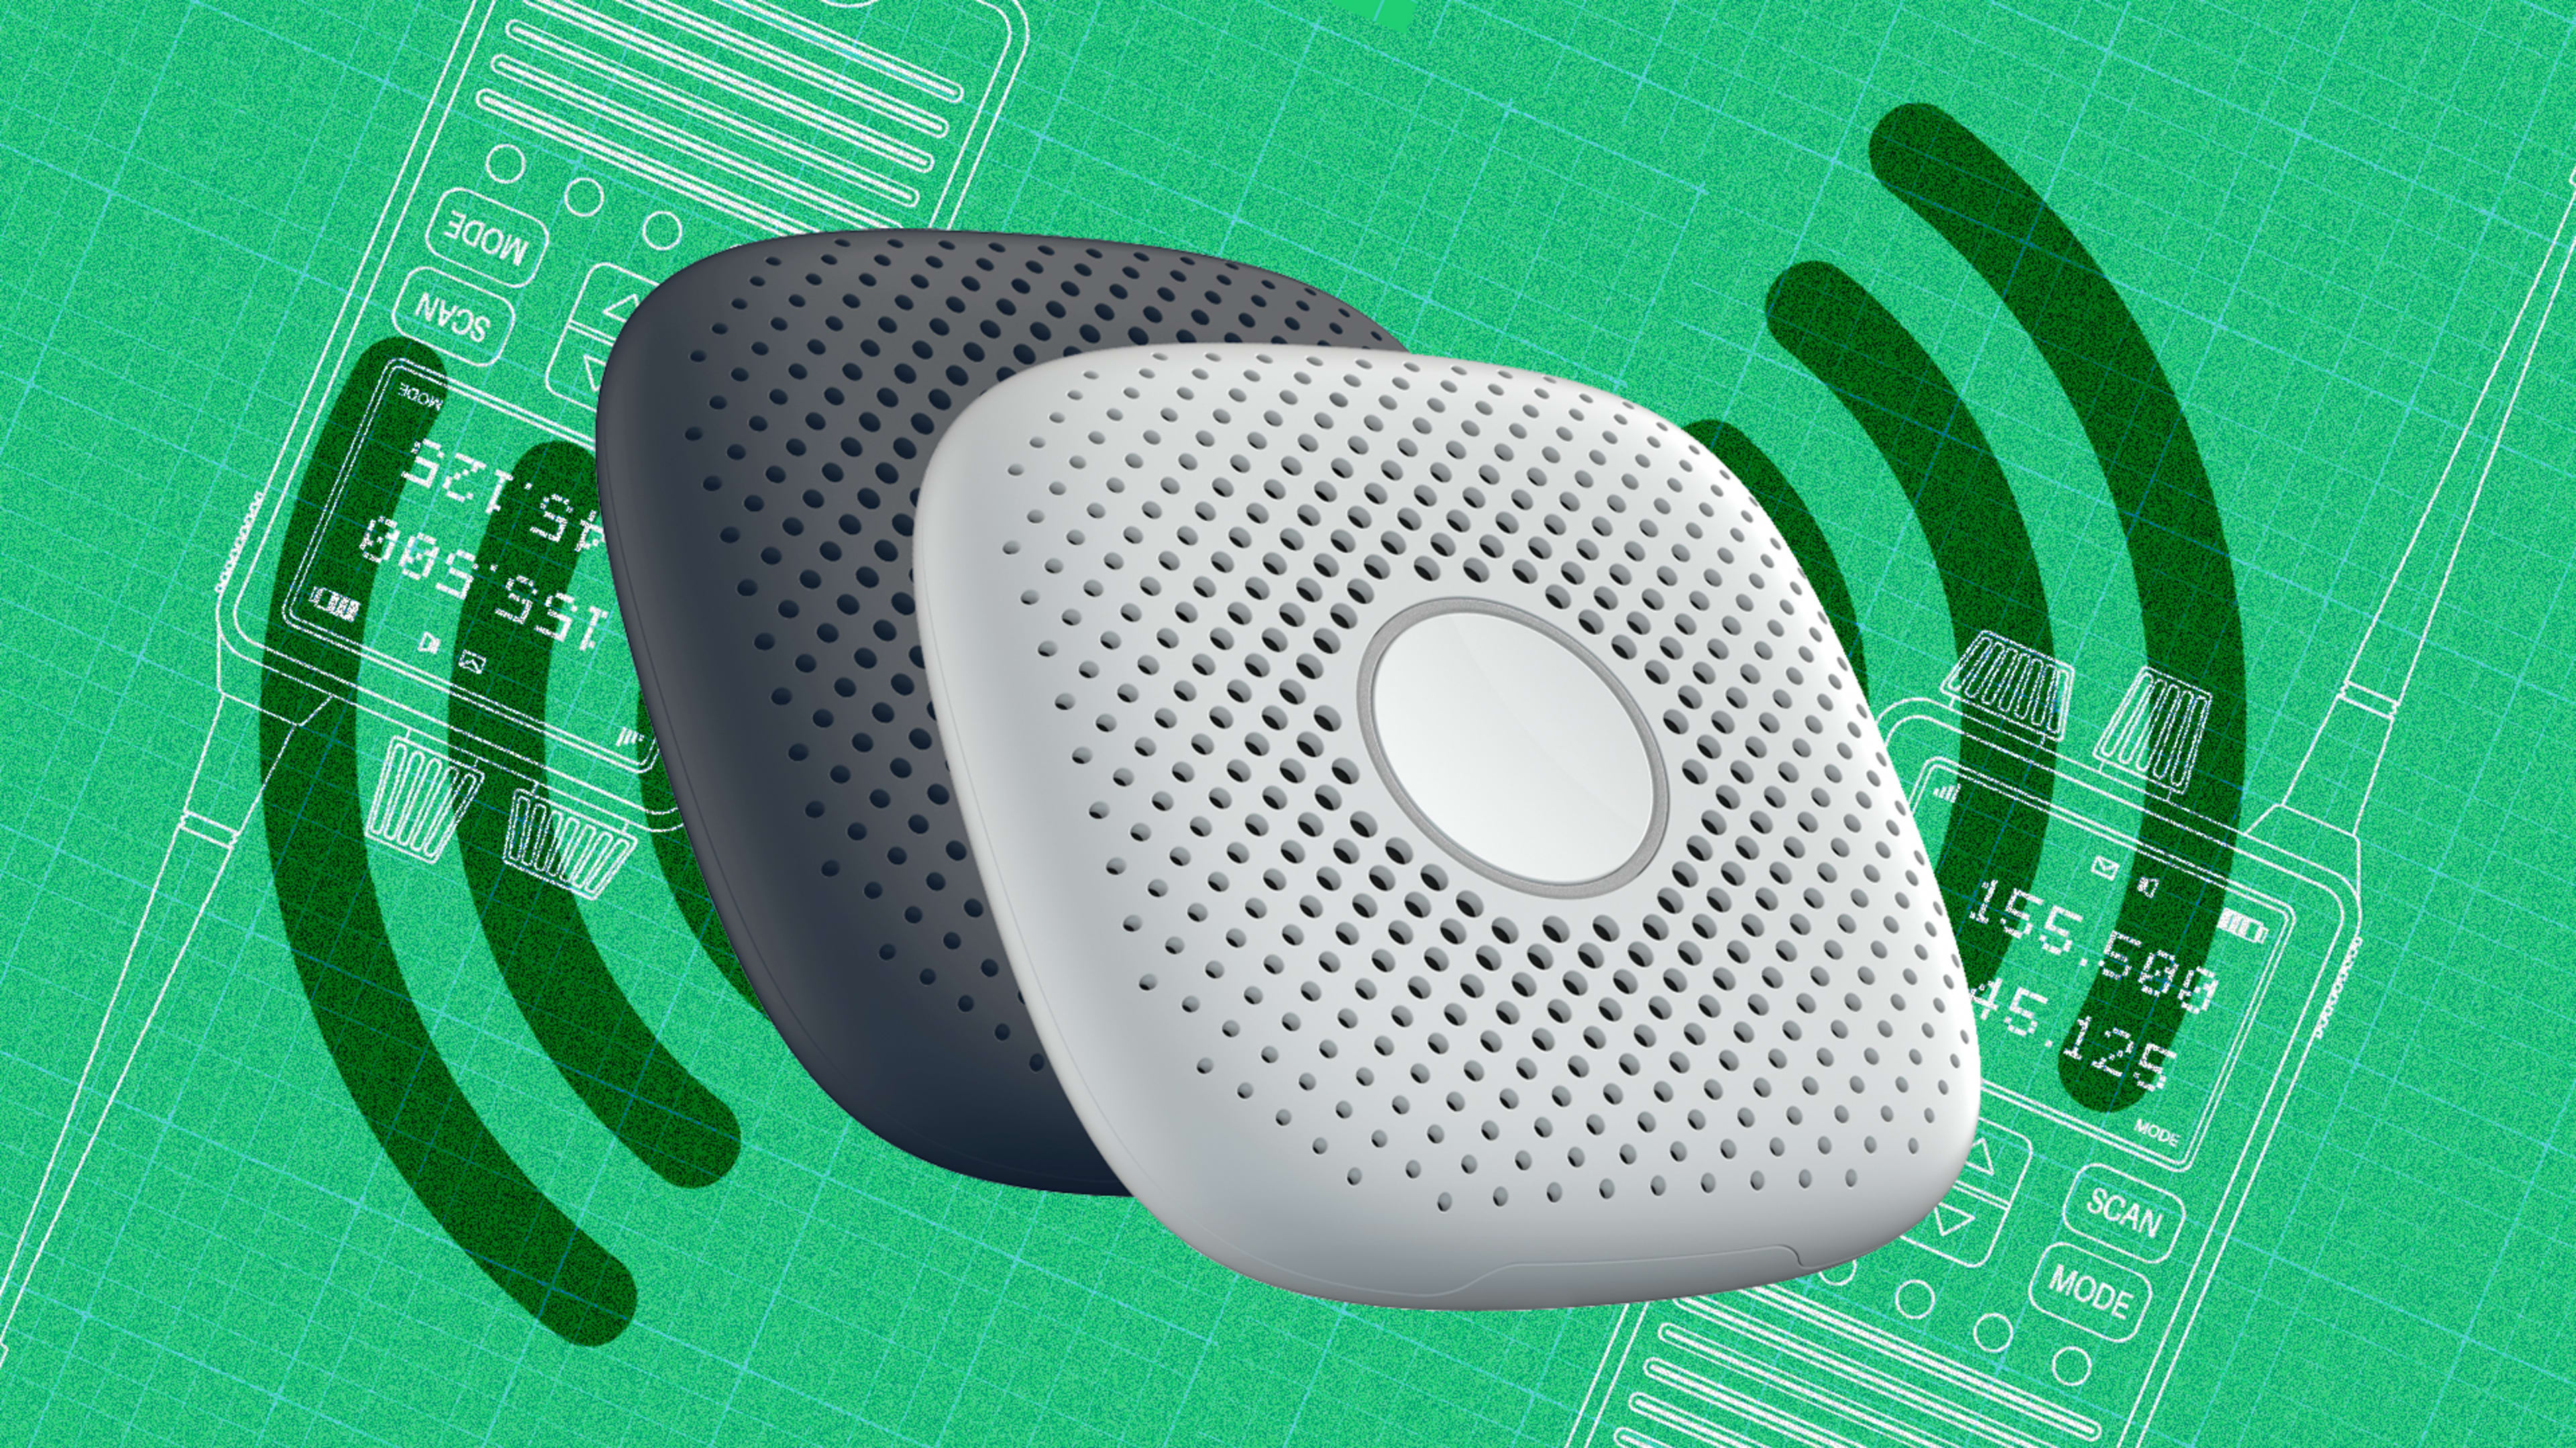 This $50 device is trying to finally kill off the walkie-talkie